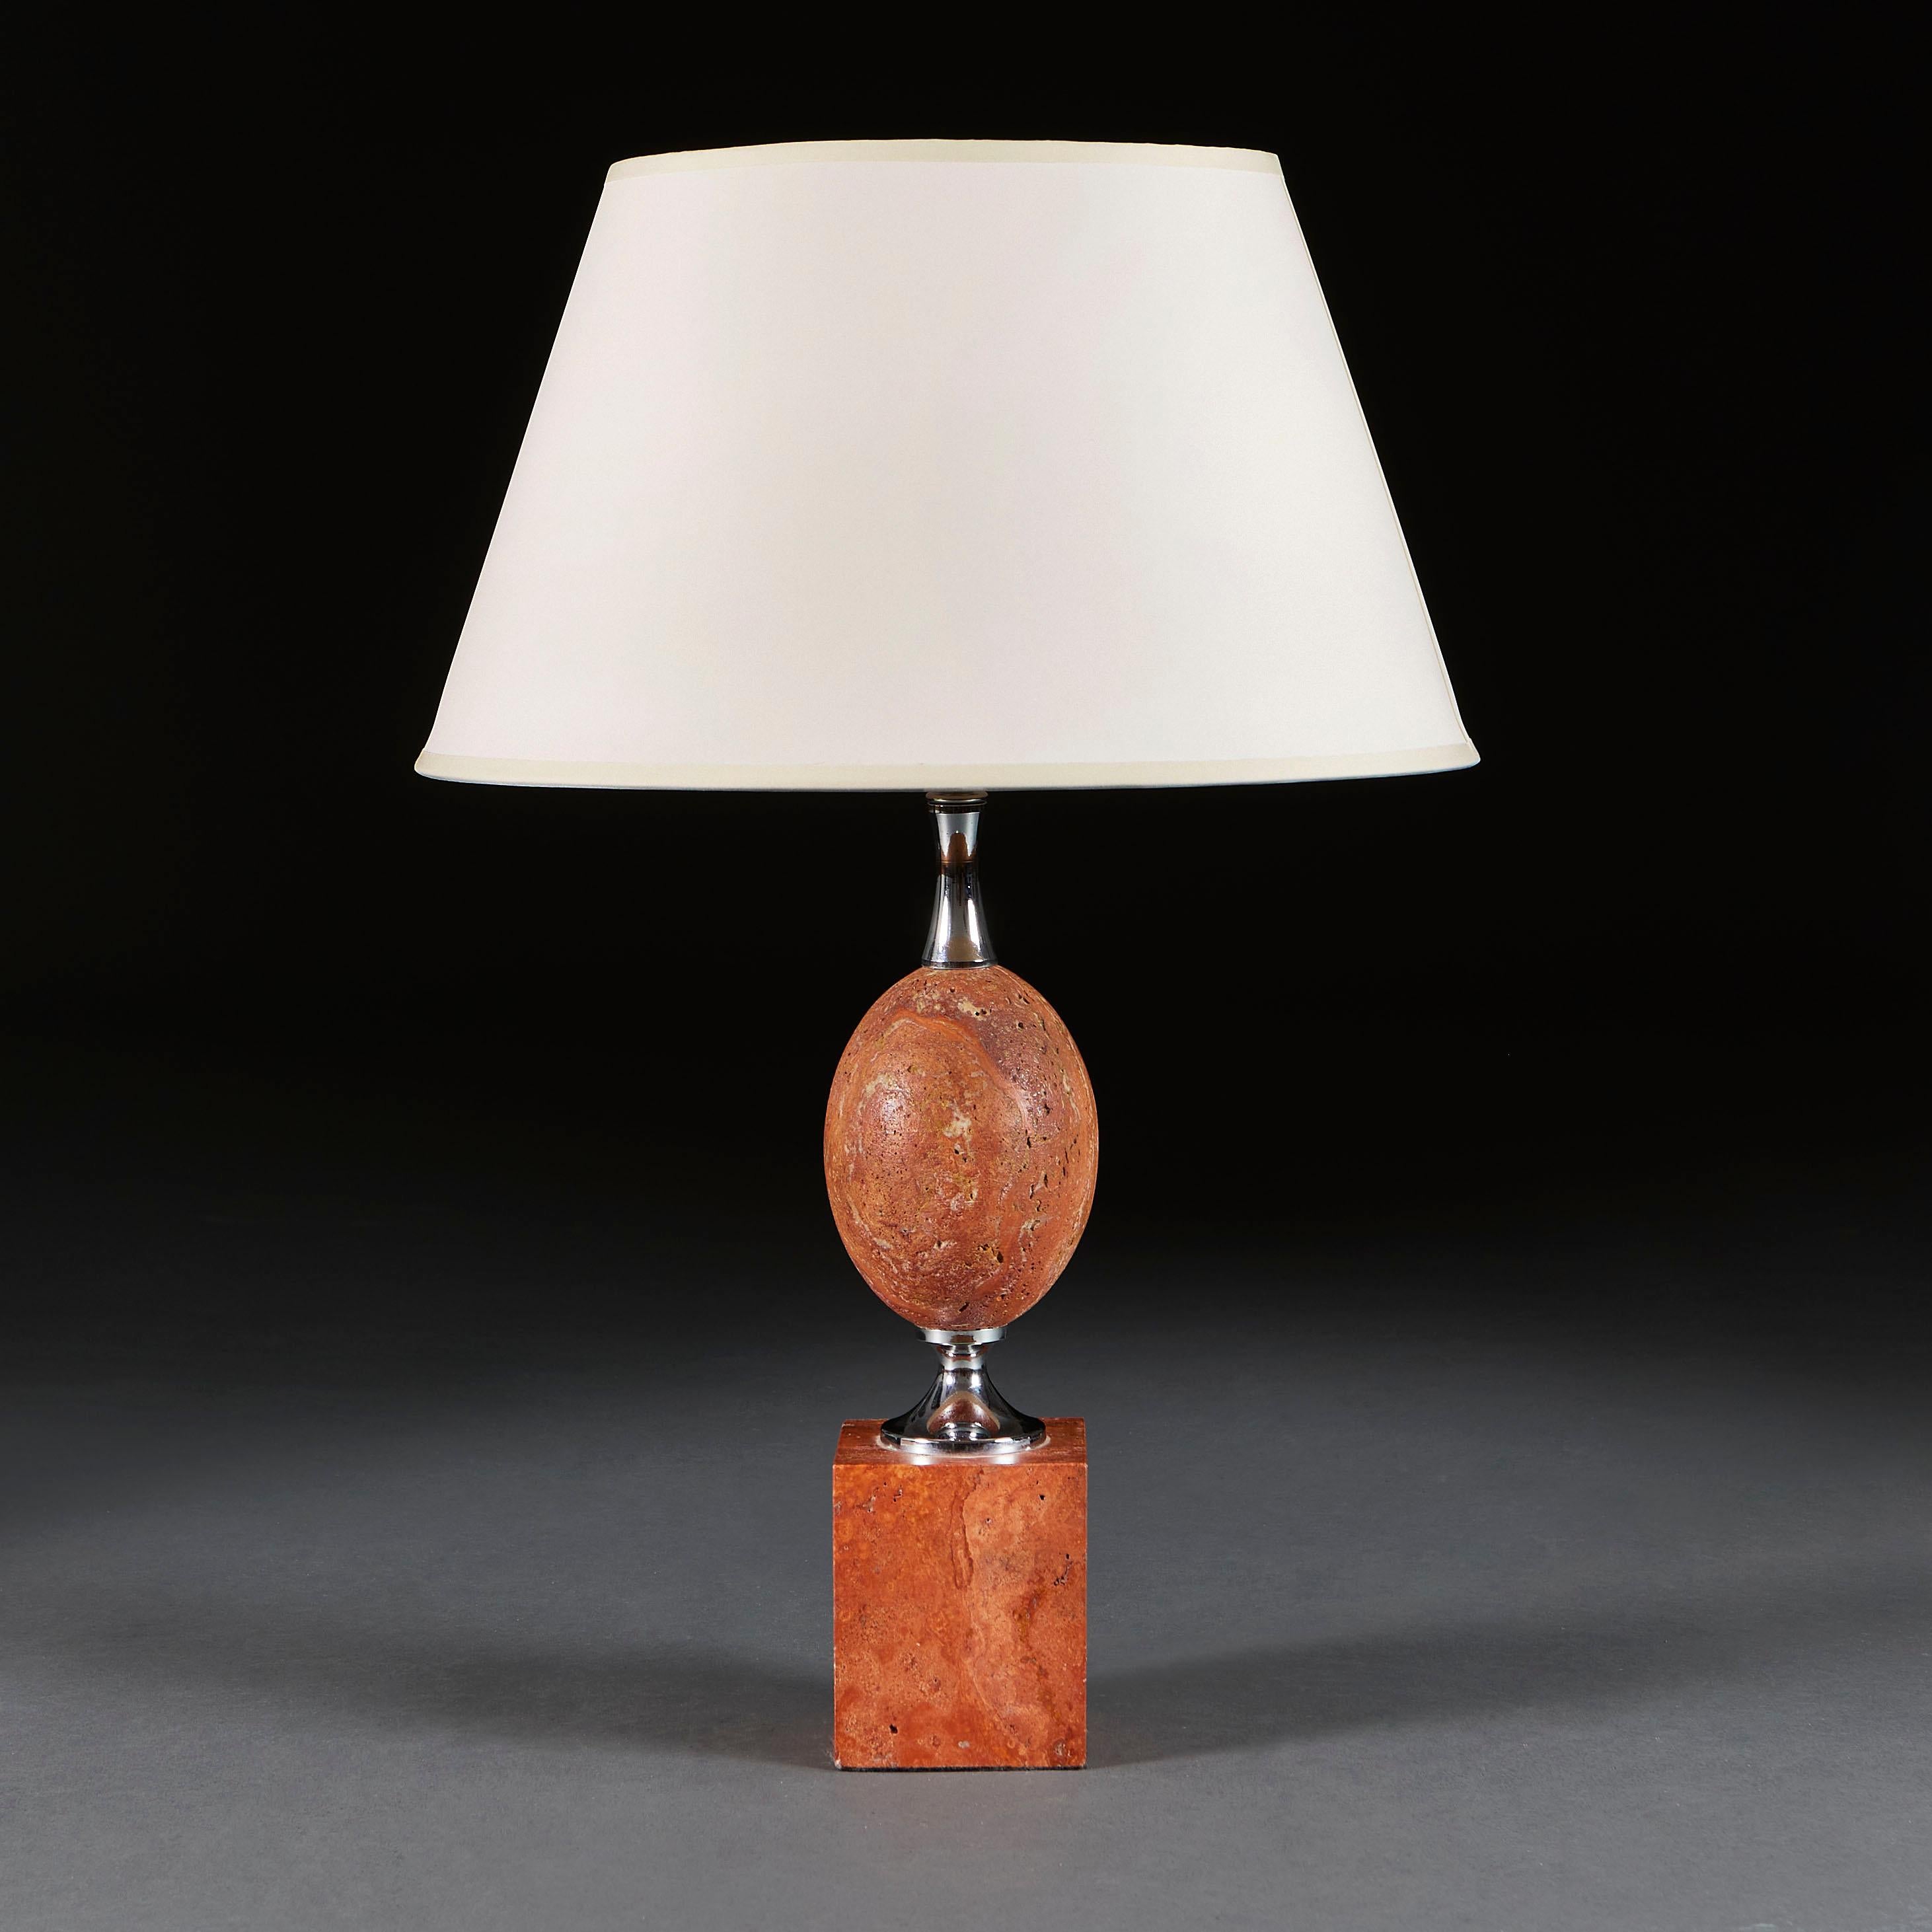 France, circa 1970

An unusual late twentieth century red travertine lamp with egg shaped body, joined with steel and supported on a square plinth base. Designed by Phillipe Barbier for Maison Barbier.

Height 40.00cm
Width 10.00cm
Depth